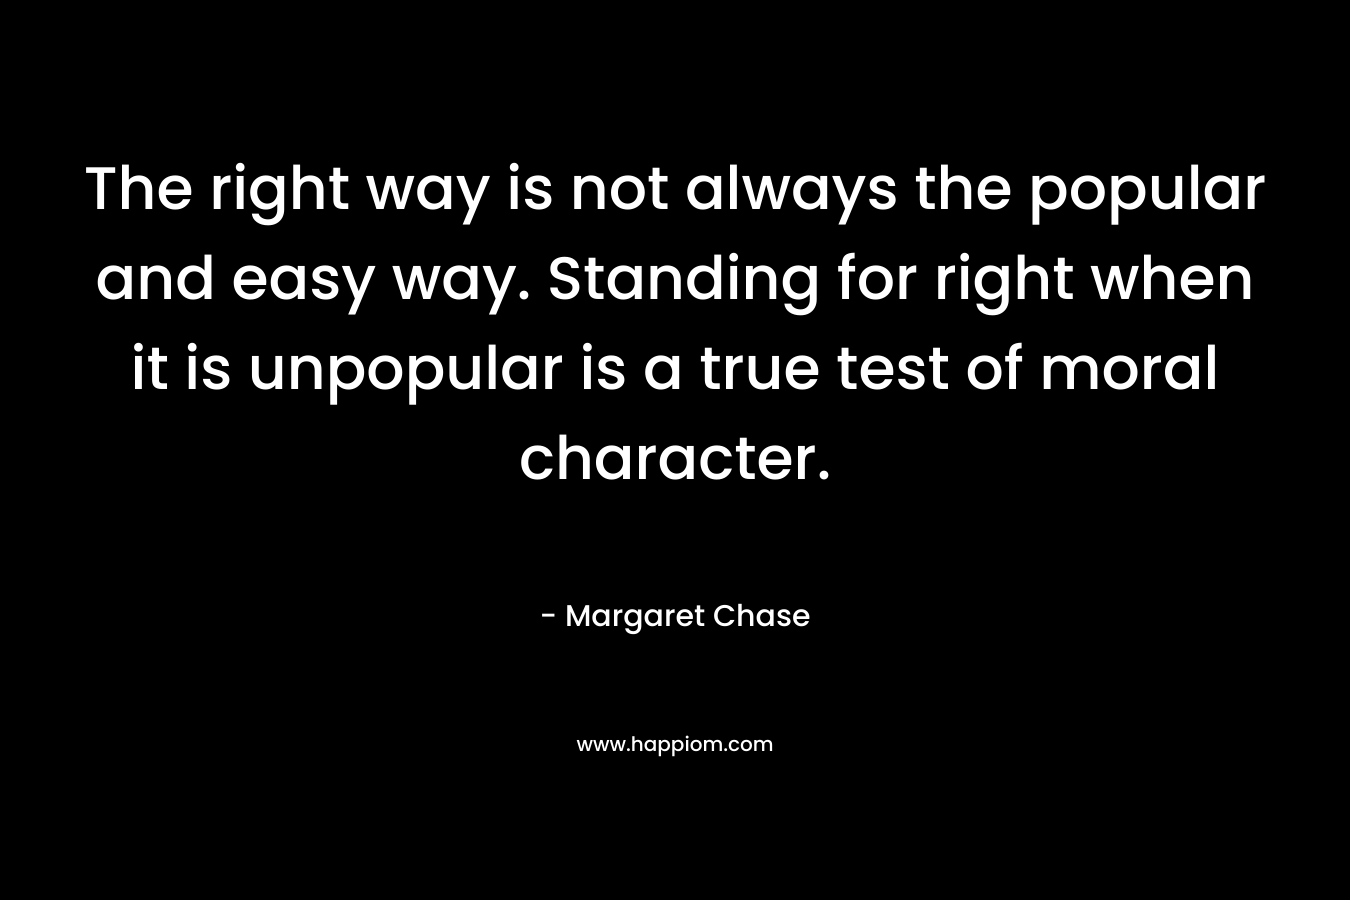 The right way is not always the popular and easy way. Standing for right when it is unpopular is a true test of moral character. – Margaret Chase